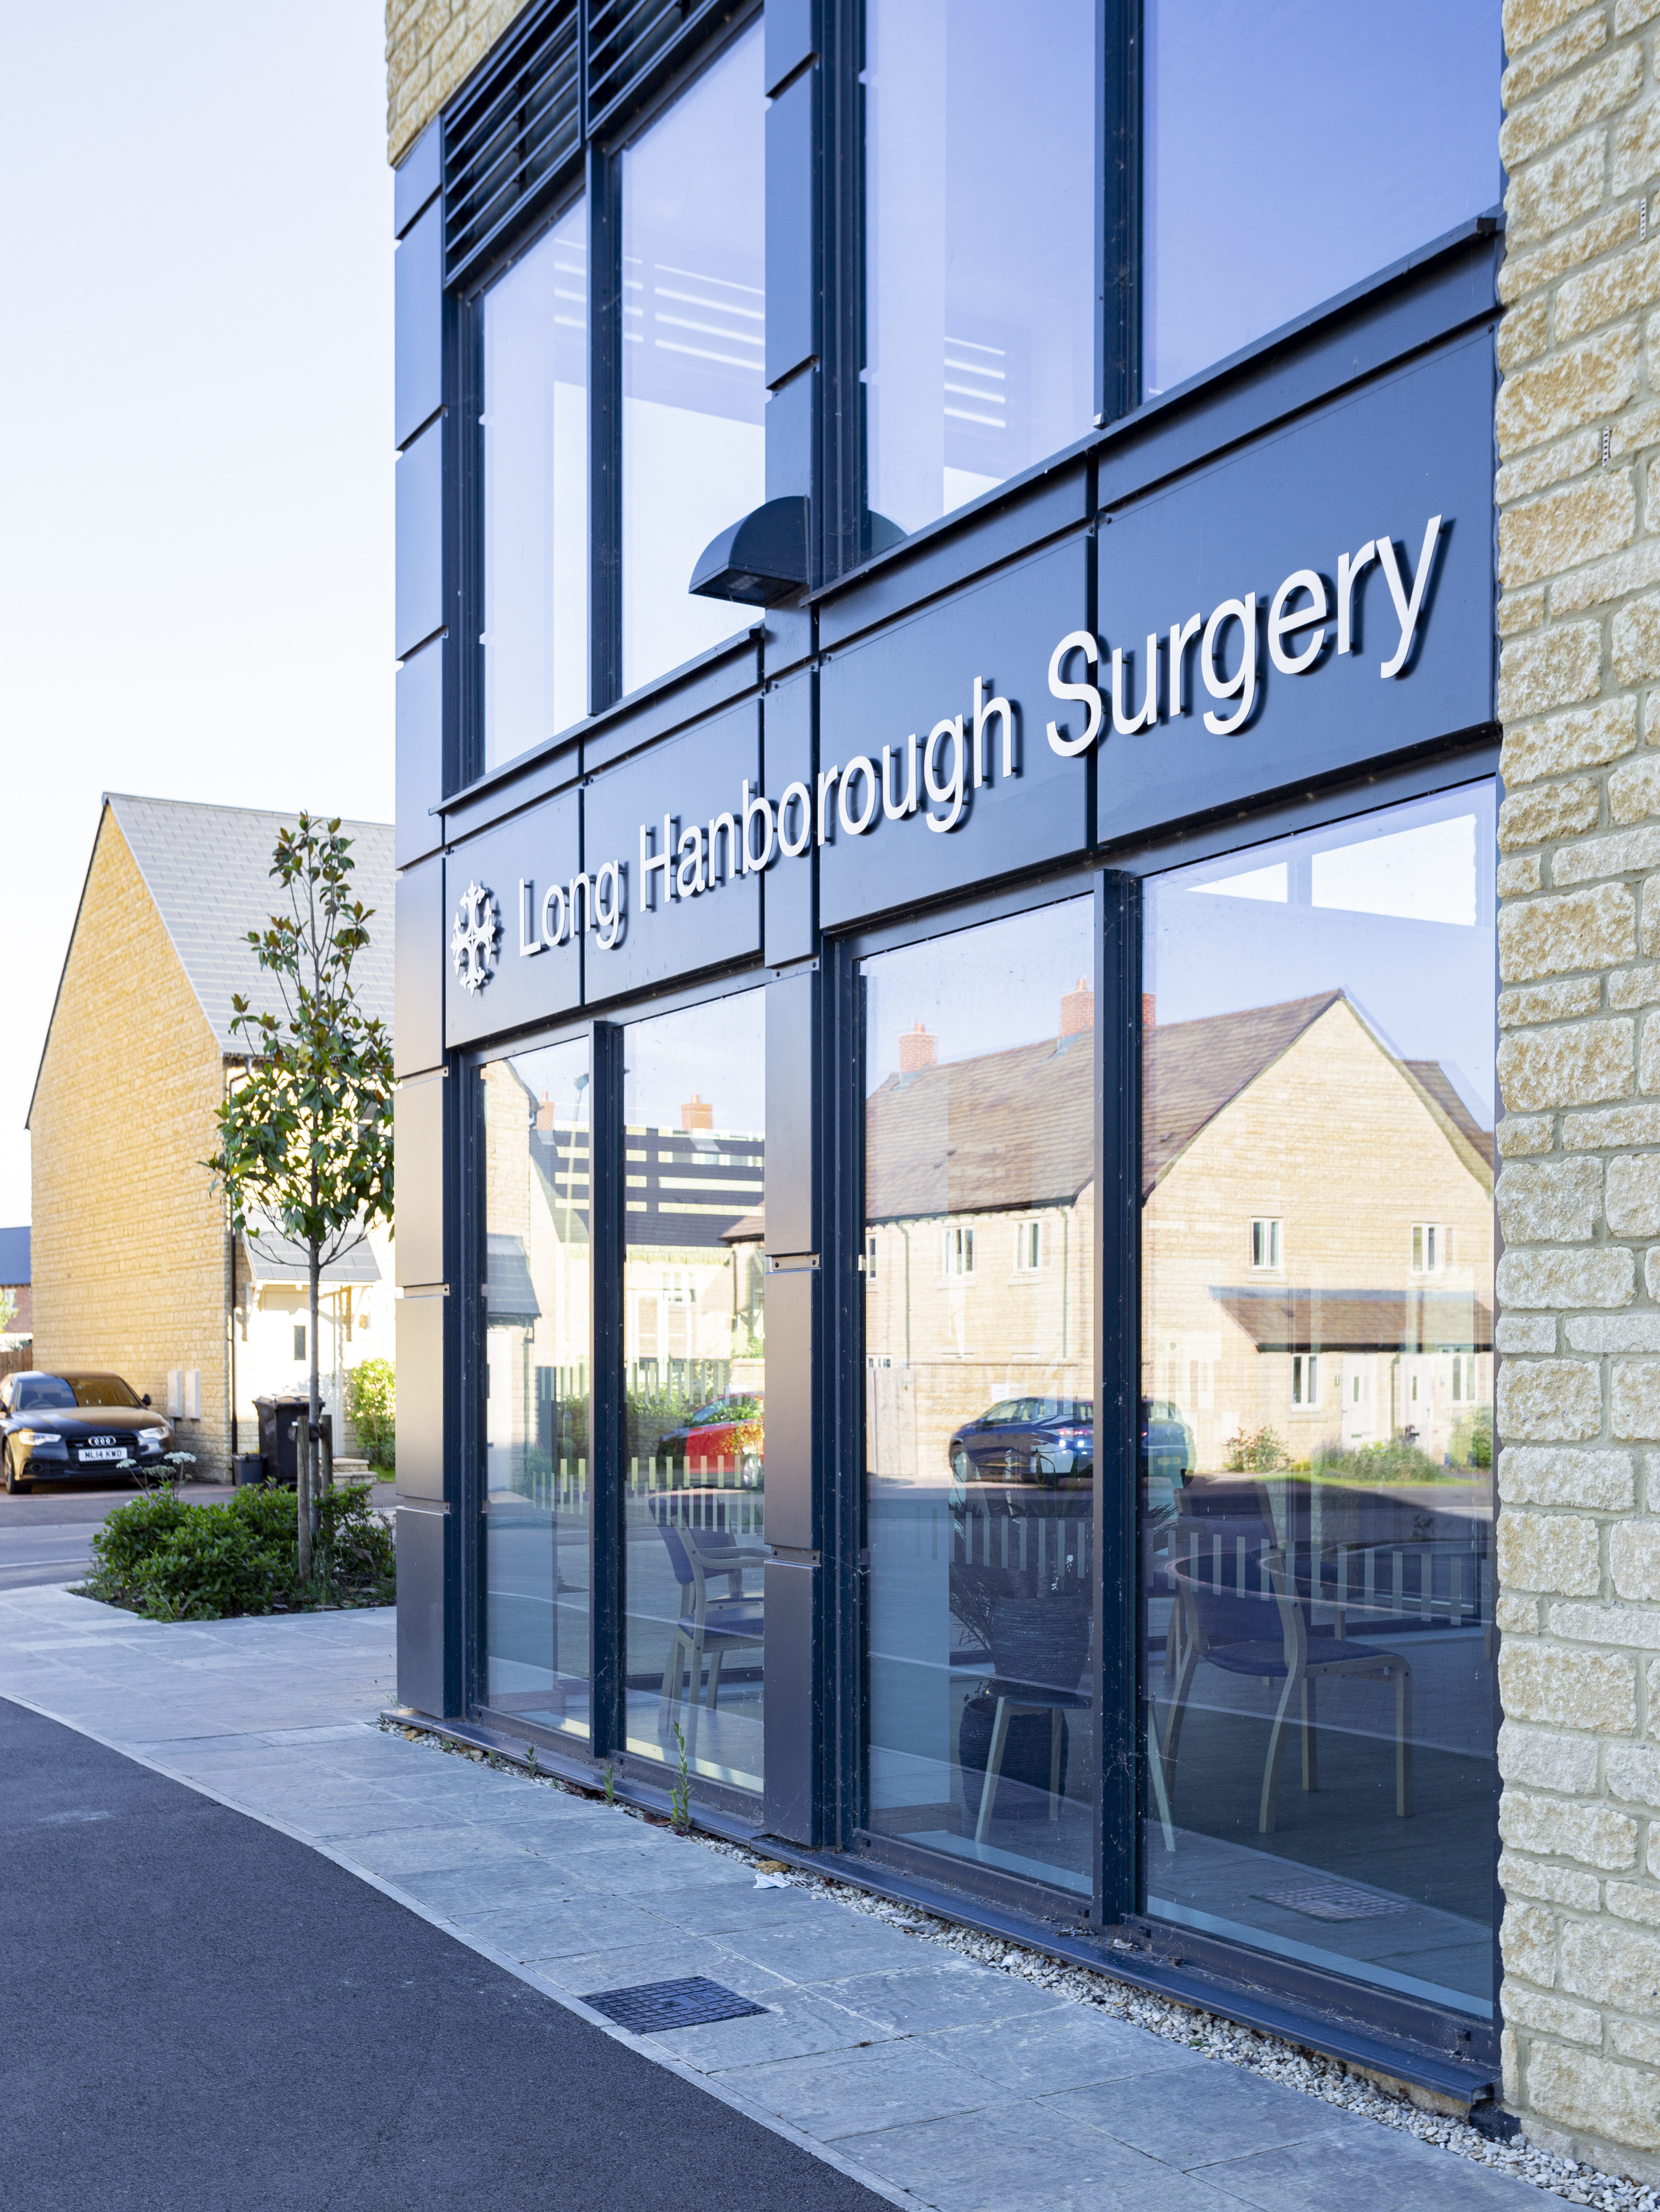 Long Hanborough, Health Care, Doctor's Surgery, Long Hanborough Surgery, WWA Studios, WWA, West Waddy Archadia, West Waddy, Archadia, Architecture, Urban Design, Town Planning